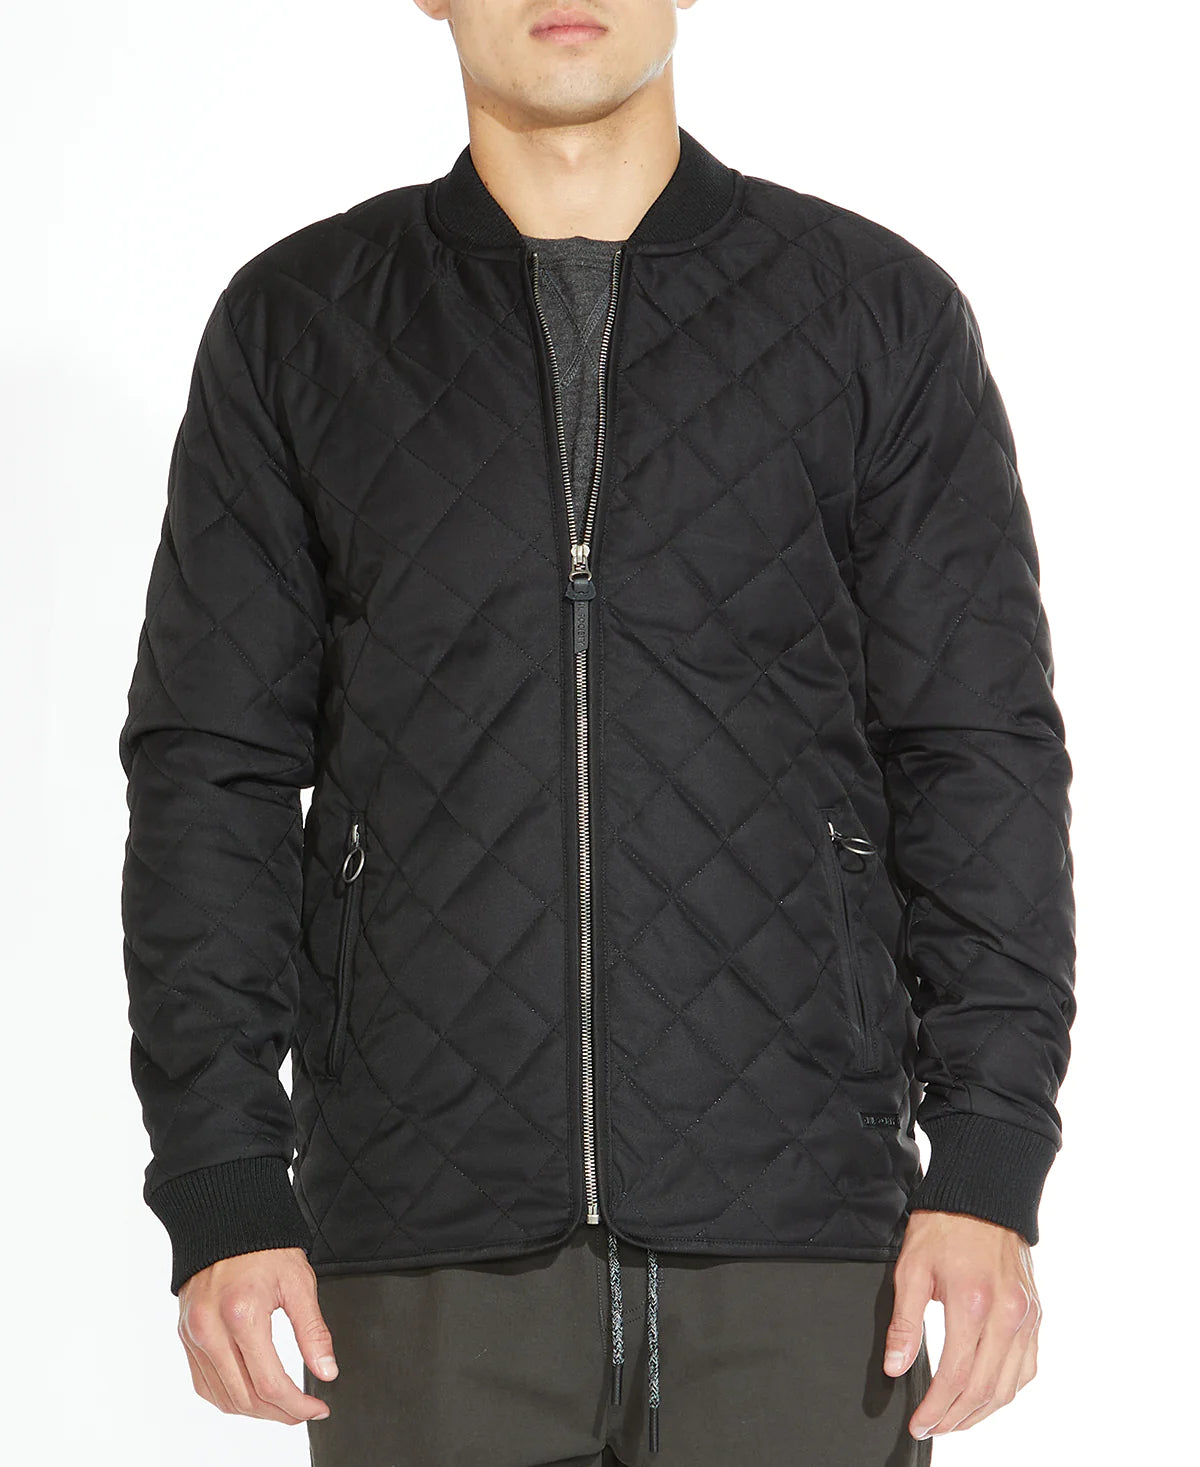 Civil Society Black Quilted Zip Up Bomber Jacket – Taelor.Style